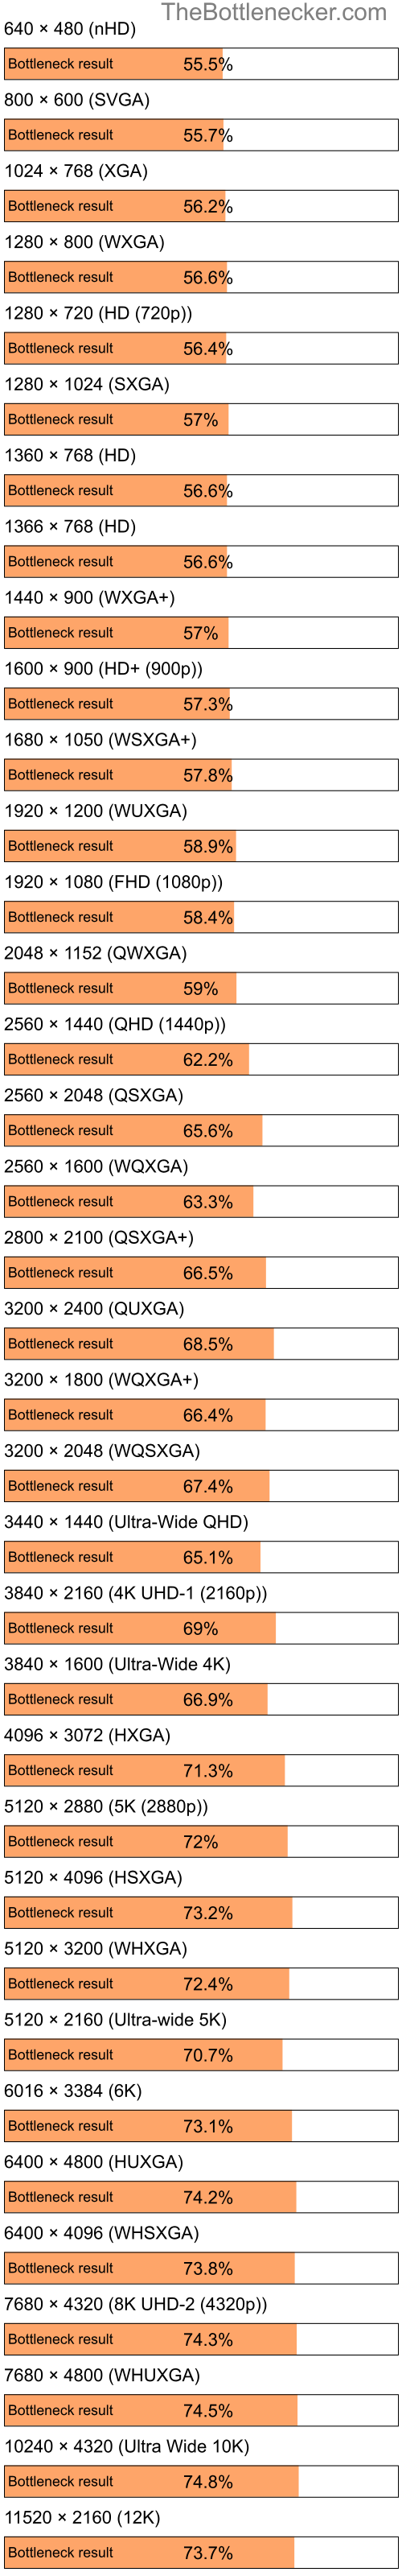 Bottleneck results by resolution for Intel Pentium 4 and NVIDIA Quadro NVS 140M in Processor Intense Tasks